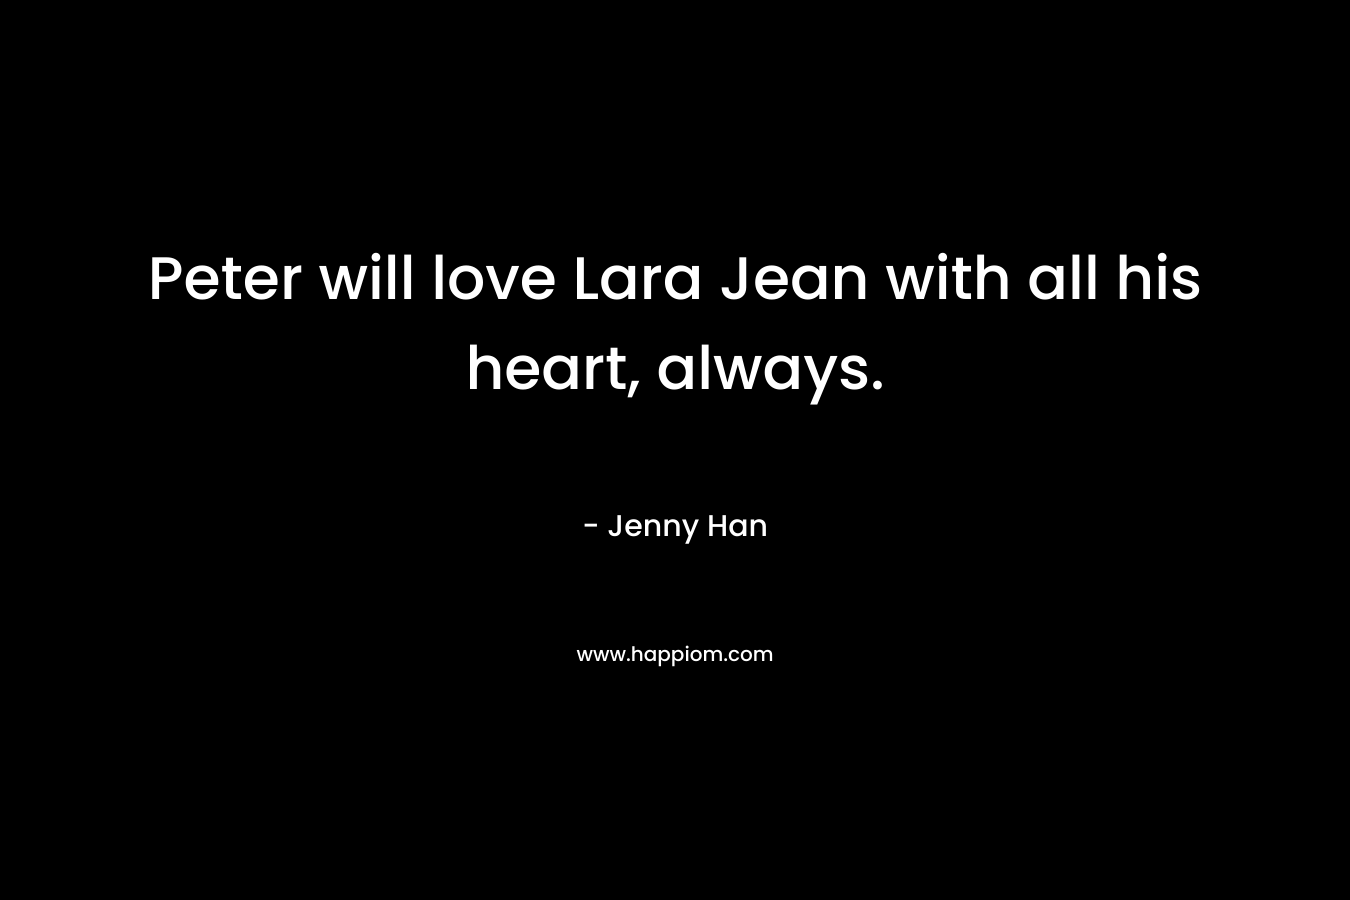 Peter will love Lara Jean with all his heart, always. – Jenny Han